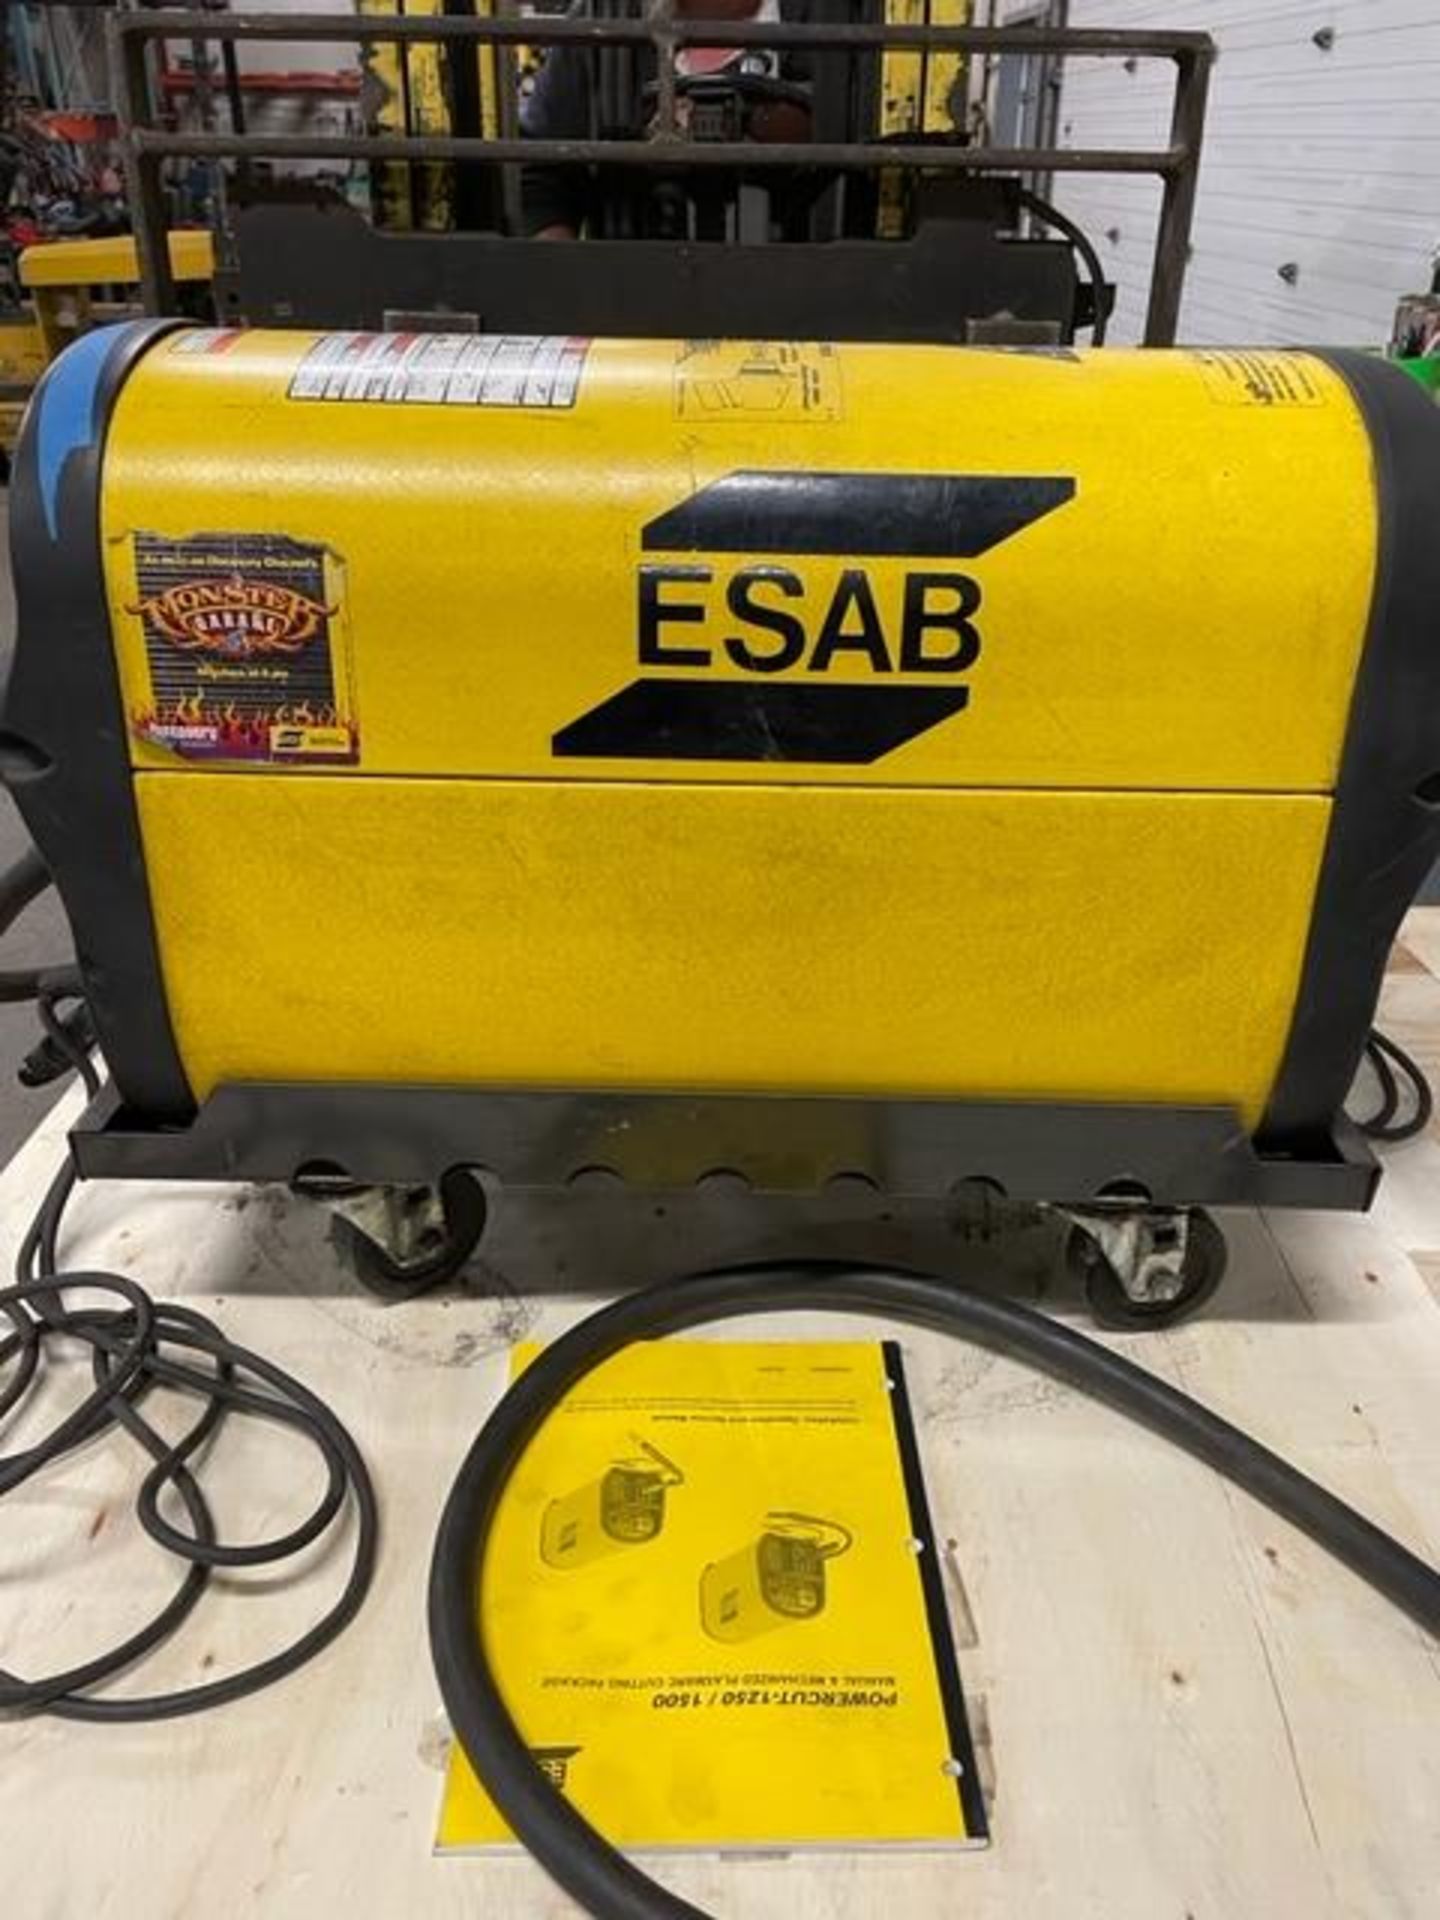 Esab Powercut 1500 Plasma Cutter Unit Cutting System complete with gun - Image 2 of 2